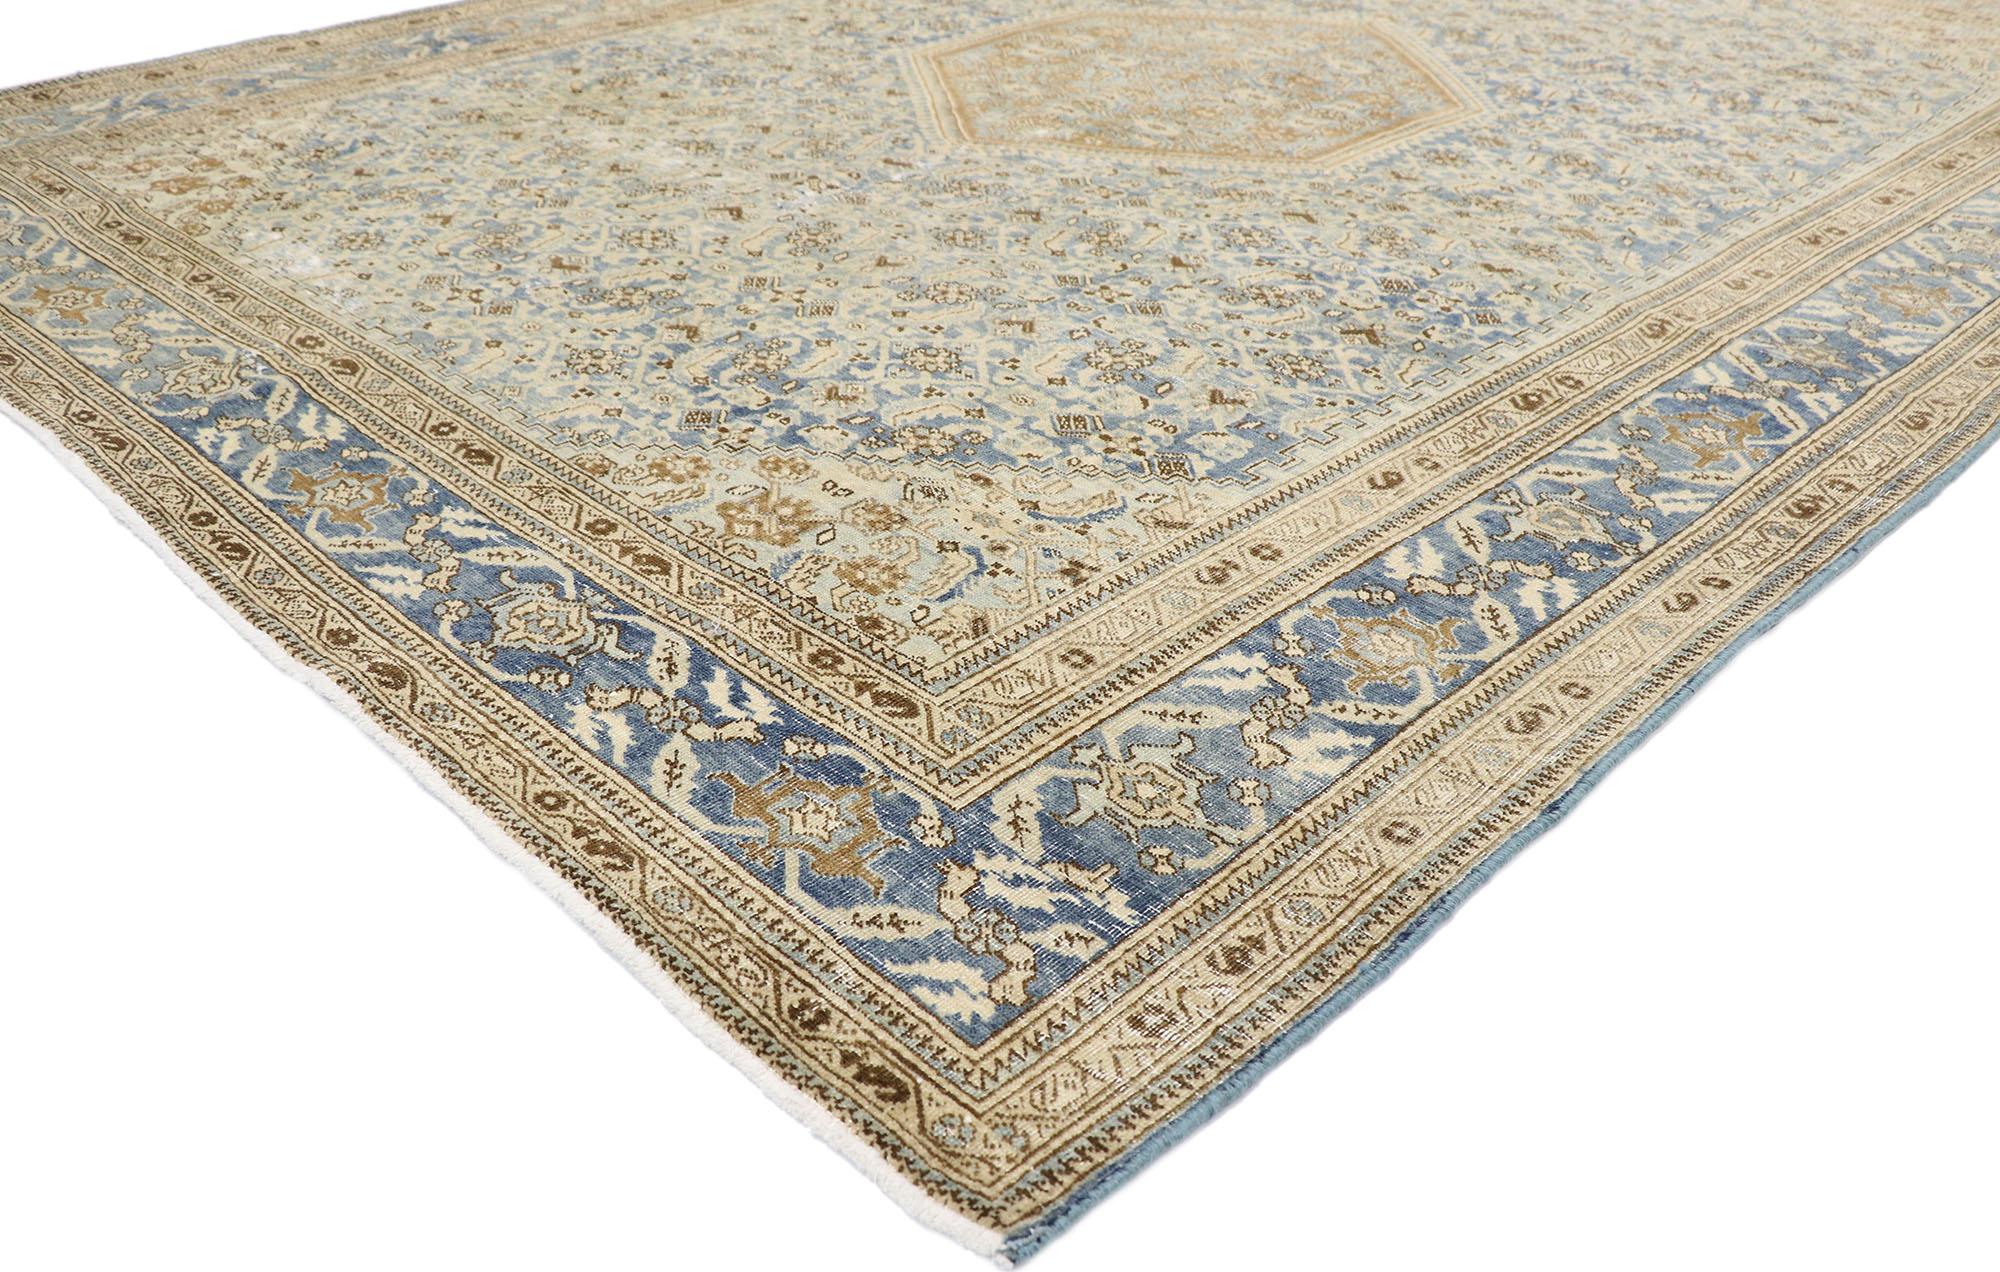 60833, distressed antique Persian Tabriz rug with Rustic Coastal style. Effortlessly chic and emanating coastal vibes with rustic sensibility, this hand-knotted wool distressed antique Persian Tabriz rug is a captivating vision of woven beauty. The